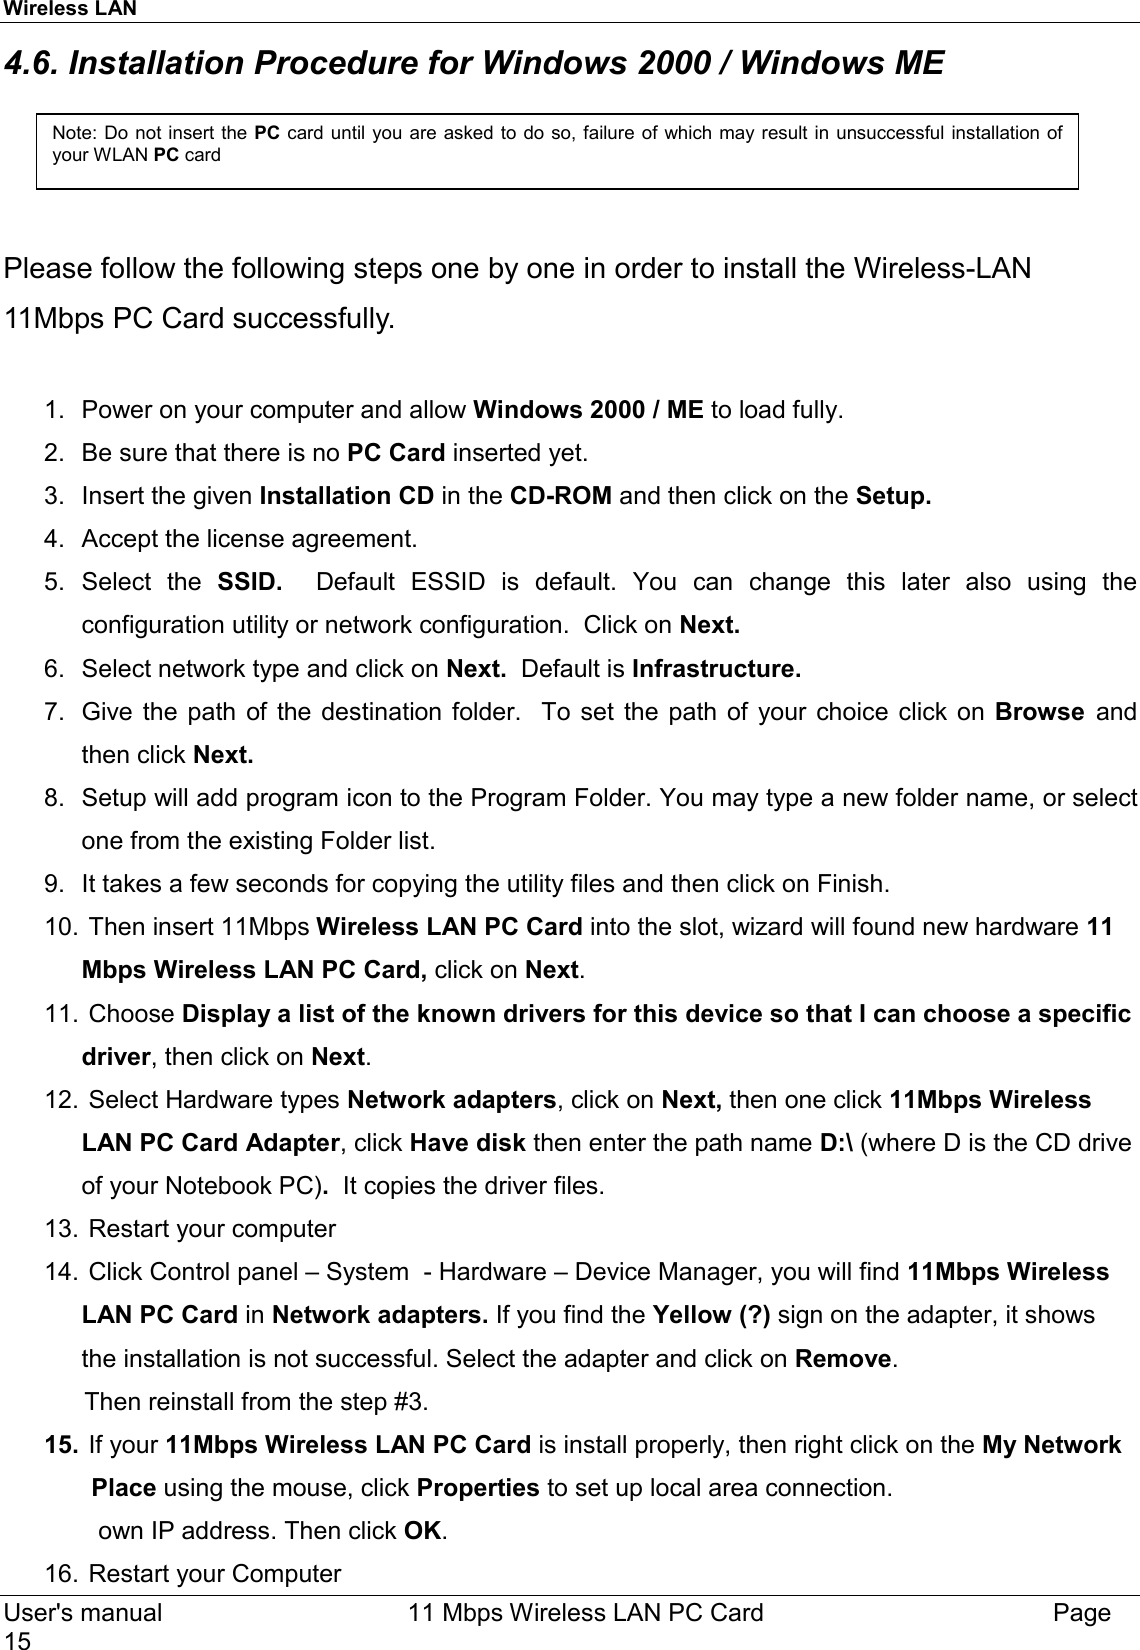 Wireless LAN     User&apos;s manual     11 Mbps Wireless LAN PC Card        Page 15  4.6. Installation Procedure for Windows 2000 / Windows ME     Please follow the following steps one by one in order to install the Wireless-LAN 11Mbps PC Card successfully.  1.  Power on your computer and allow Windows 2000 / ME to load fully. 2.  Be sure that there is no PC Card inserted yet.  3.  Insert the given Installation CD in the CD-ROM and then click on the Setup. 4.  Accept the license agreement. 5. Select the SSID.  Default ESSID is default. You can change this later also using the configuration utility or network configuration.  Click on Next. 6.  Select network type and click on Next.  Default is Infrastructure.     7.  Give the path of the destination folder.  To set the path of your choice click on Browse  and then click Next. 8.  Setup will add program icon to the Program Folder. You may type a new folder name, or select one from the existing Folder list. 9.  It takes a few seconds for copying the utility files and then click on Finish.  10.  Then insert 11Mbps Wireless LAN PC Card into the slot, wizard will found new hardware 11 Mbps Wireless LAN PC Card, click on Next. 11.   Choose  Display a list of the known drivers for this device so that I can choose a specific driver, then click on Next. 12.  Select Hardware types Network adapters, click on Next, then one click 11Mbps Wireless LAN PC Card Adapter, click Have disk then enter the path name D:\ (where D is the CD drive of your Notebook PC).  It copies the driver files.  13.  Restart your computer  14.  Click Control panel – System  - Hardware – Device Manager, you will find 11Mbps Wireless LAN PC Card in Network adapters. If you find the Yellow (?) sign on the adapter, it shows the installation is not successful. Select the adapter and click on Remove.              Then reinstall from the step #3.  15.  If your 11Mbps Wireless LAN PC Card is install properly, then right click on the My Network                 Place using the mouse, click Properties to set up local area connection.                own IP address. Then click OK.  16.  Restart your Computer   Note: Do not insert the PC card until you are asked to do so, failure of which may result in unsuccessful installation ofyour WLAN PC card 